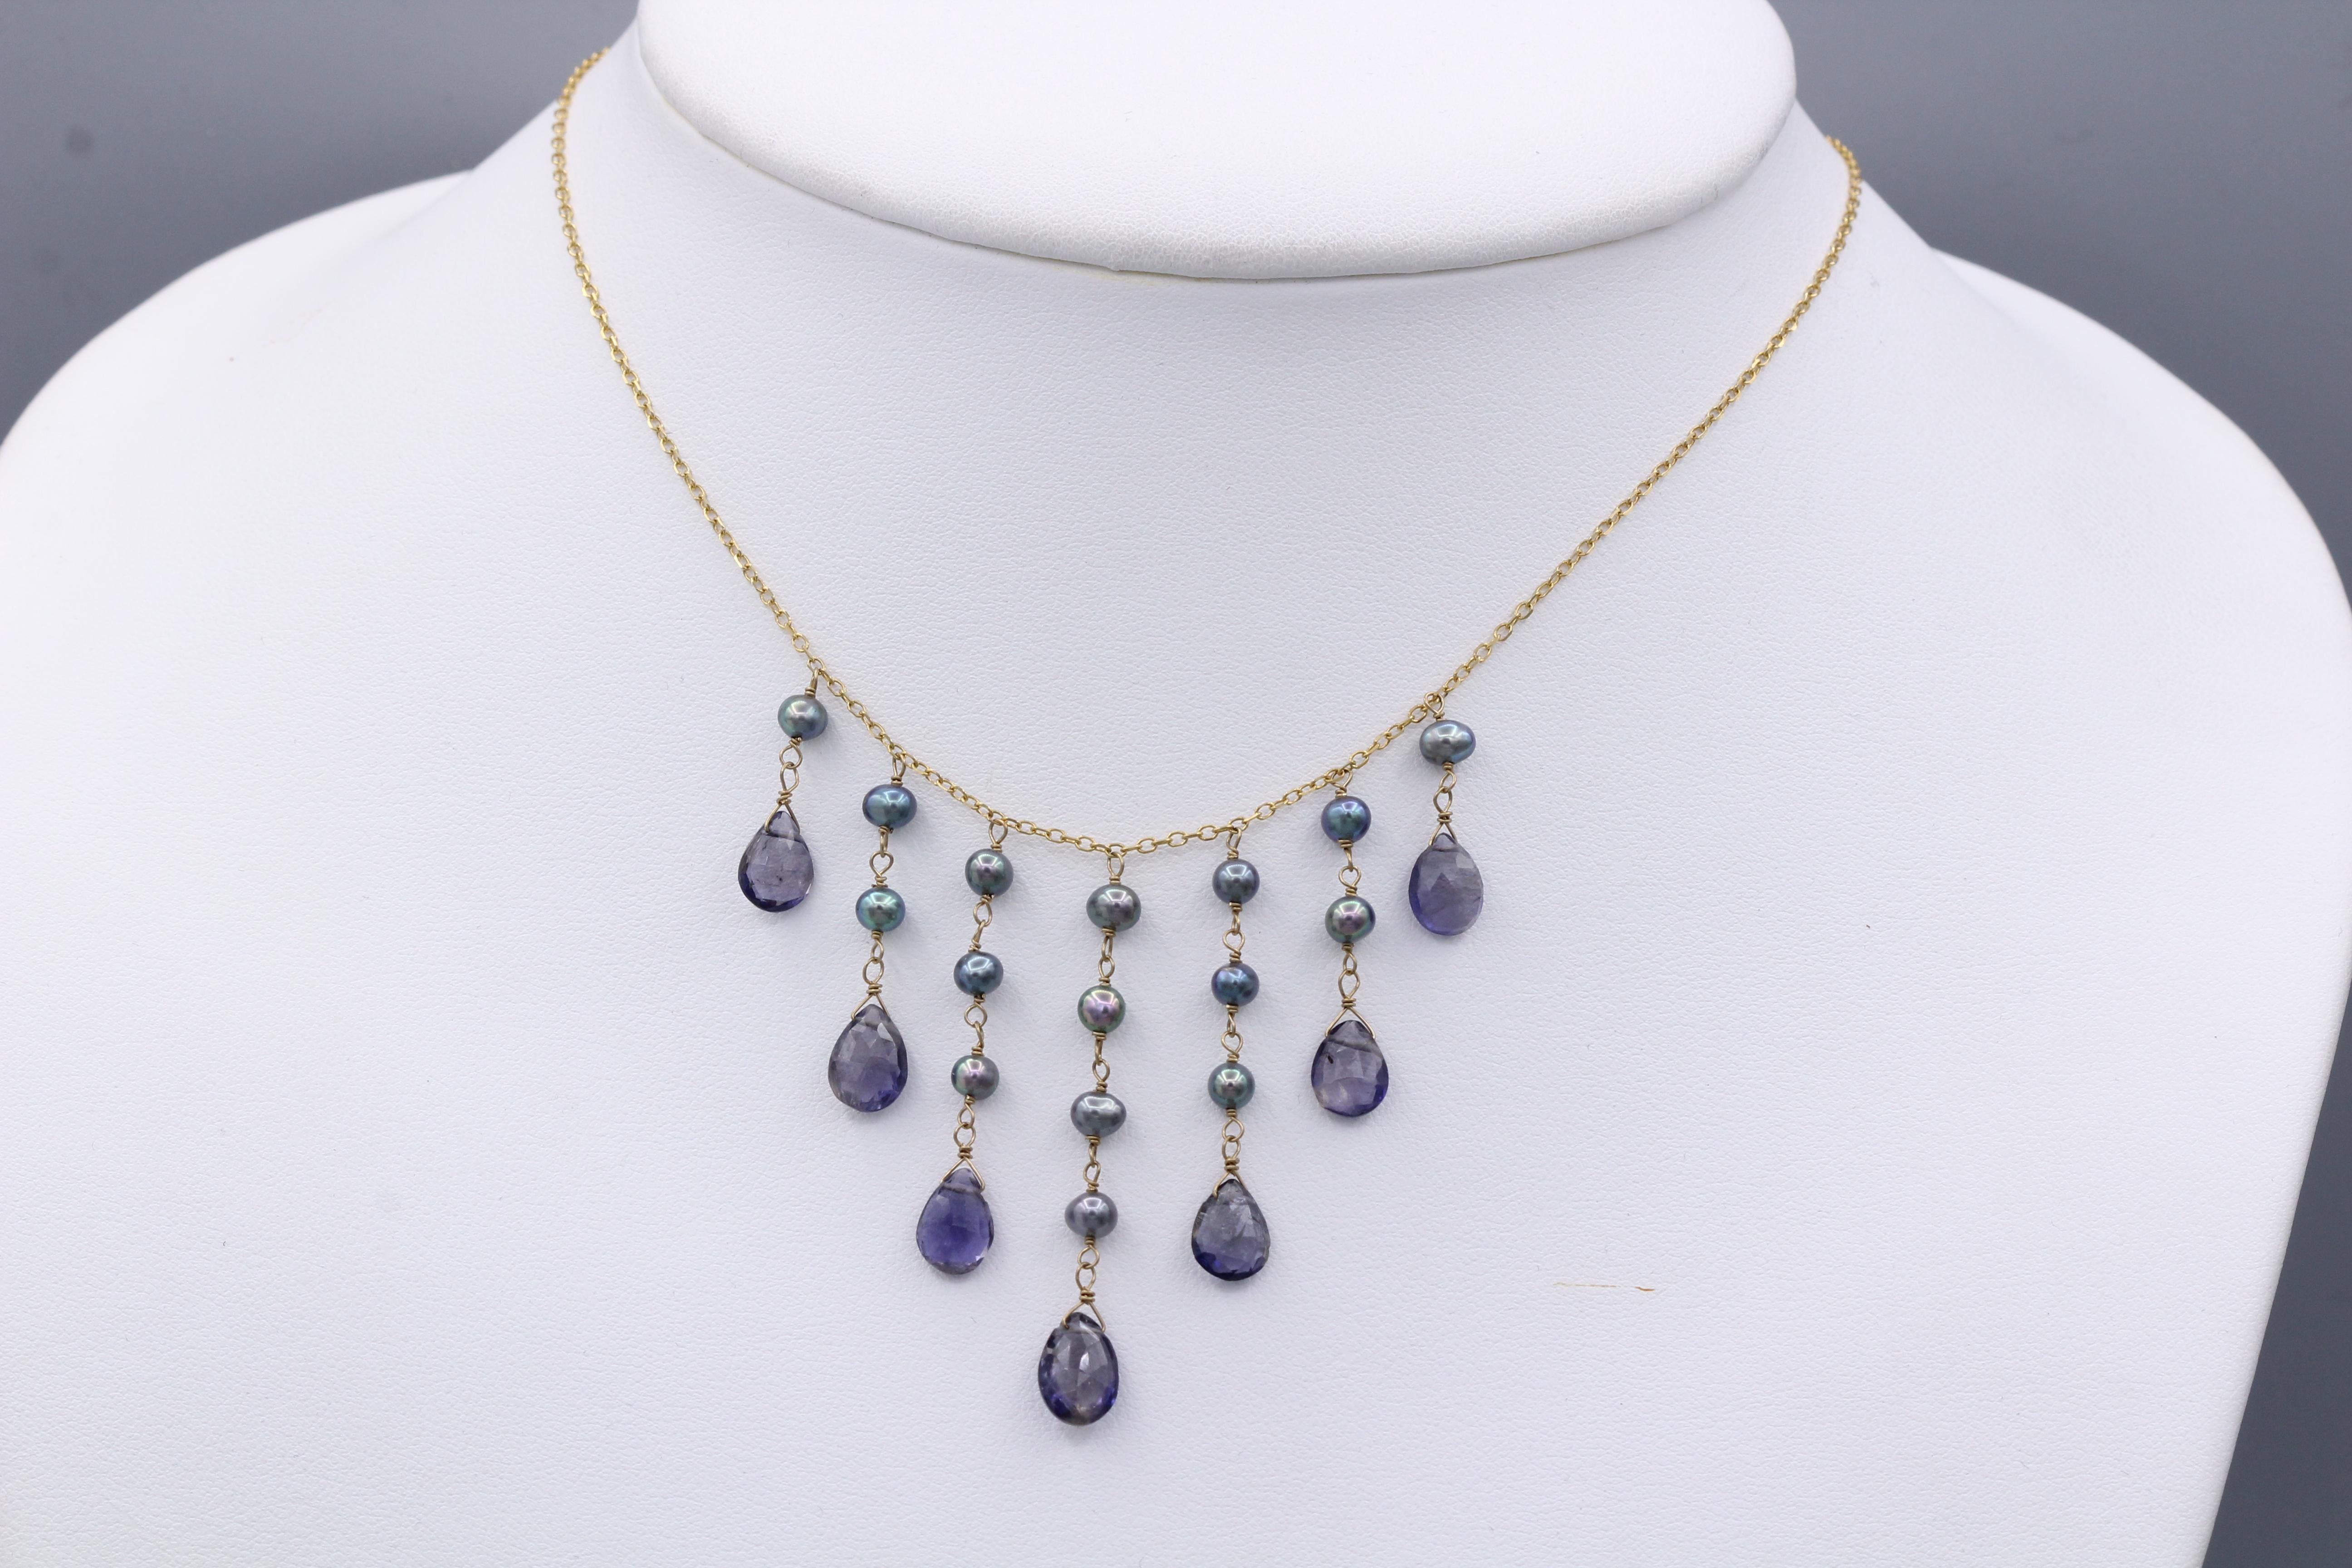 Dangling Necklace Blue Amethyst & Pearls Dangle Style 14 Karat Yellow Gold For Sale 3